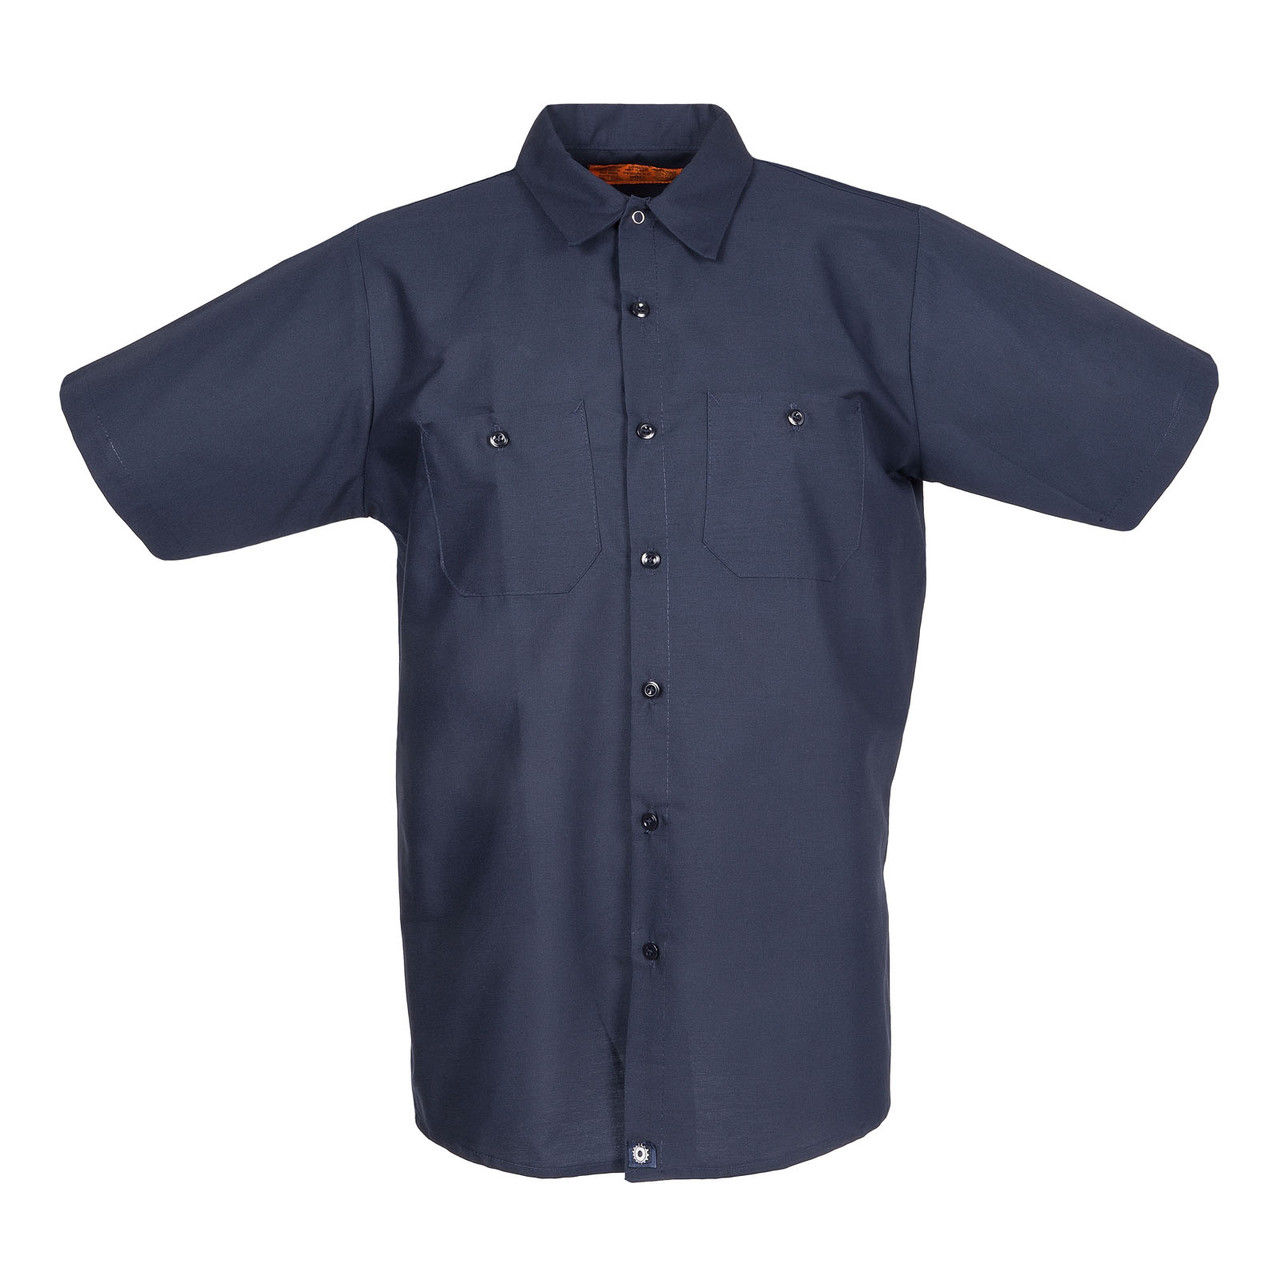 Do you sell long sleeve 4x industrial work shirts?